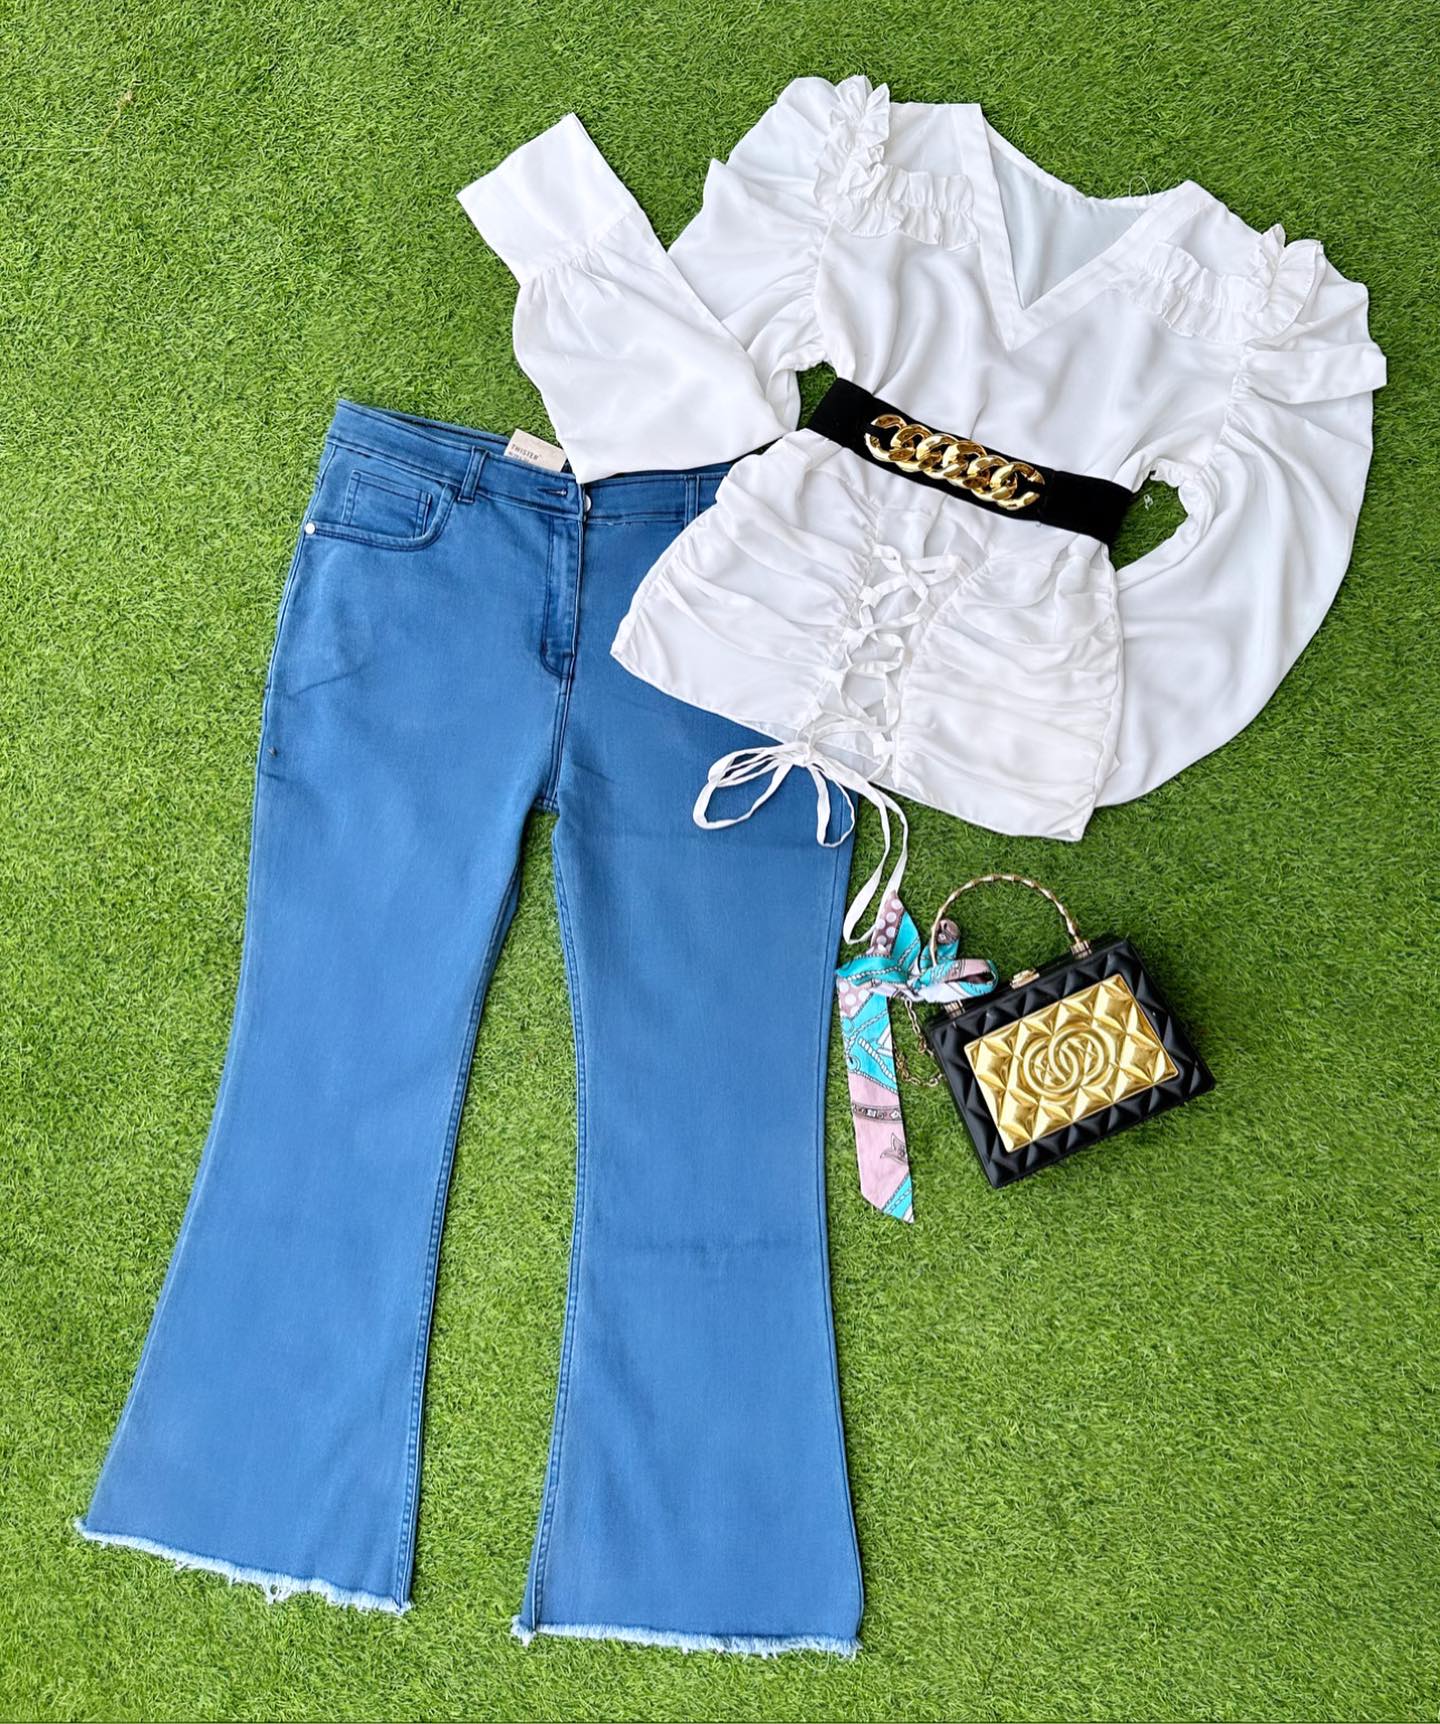 Chic Dory & Frill Shirt with Bell Bottom Jeans Ensemble